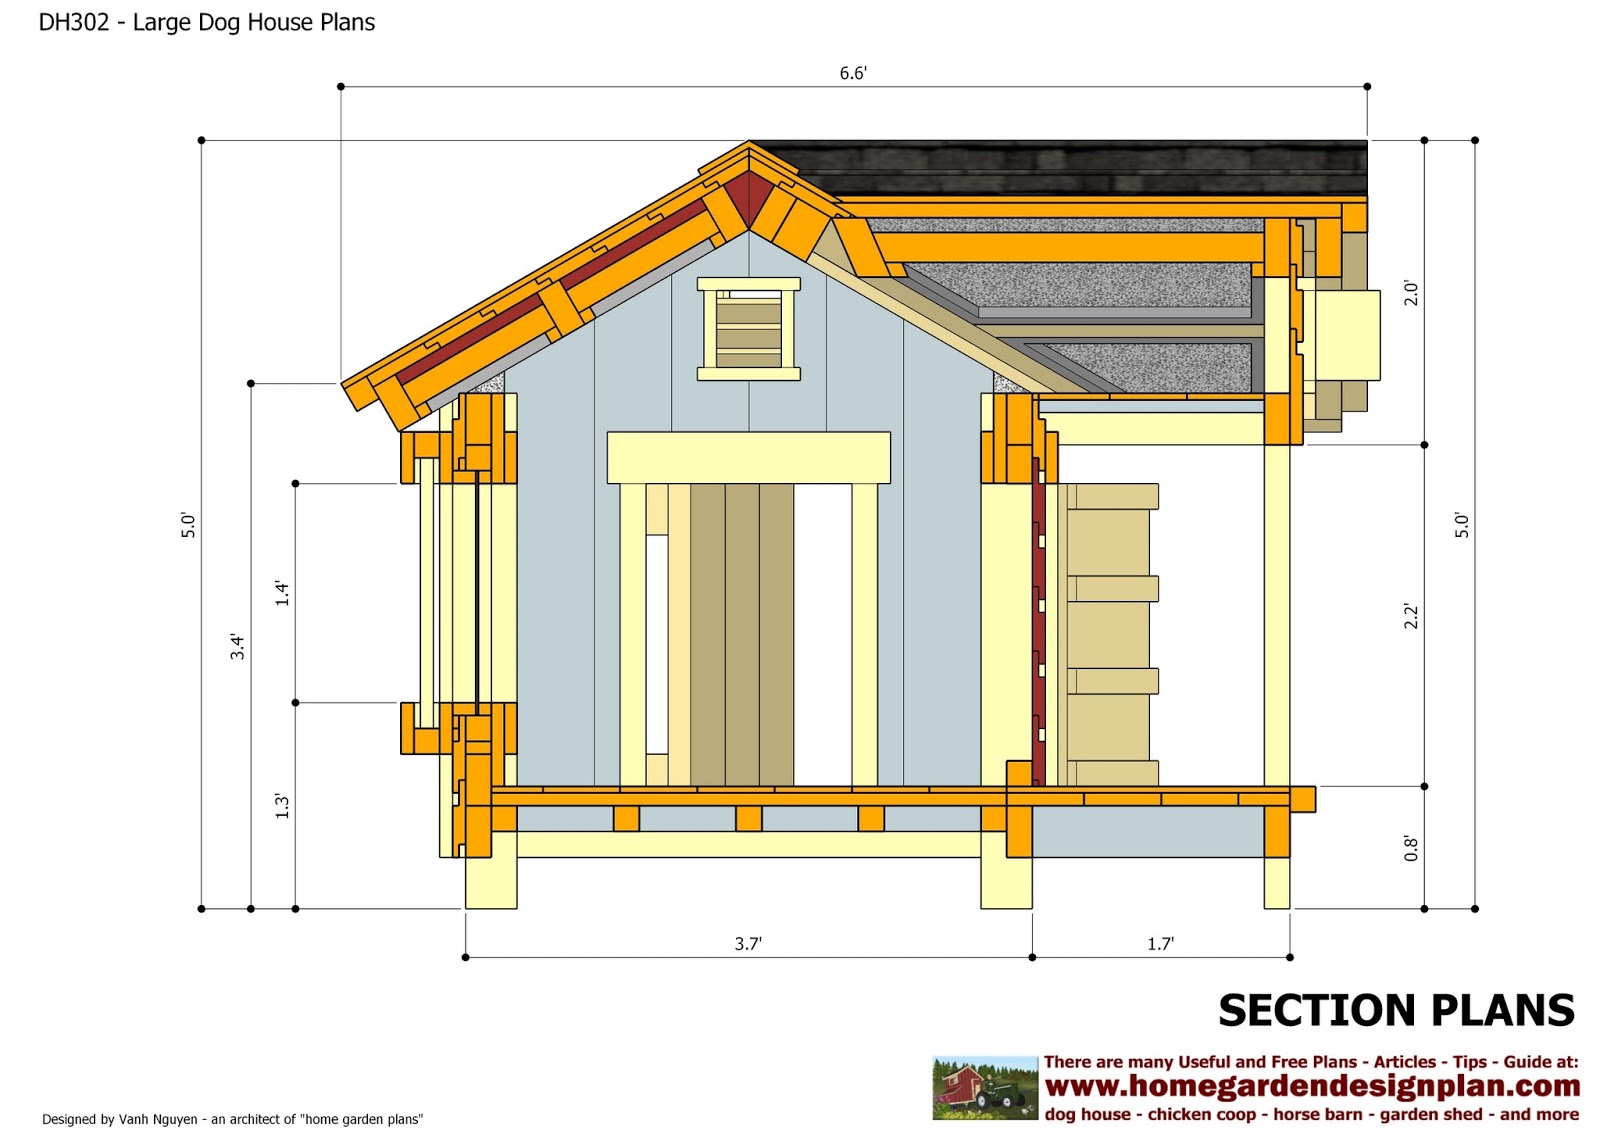 home garden plans: DH302 - Insulated Dog House Plans ...